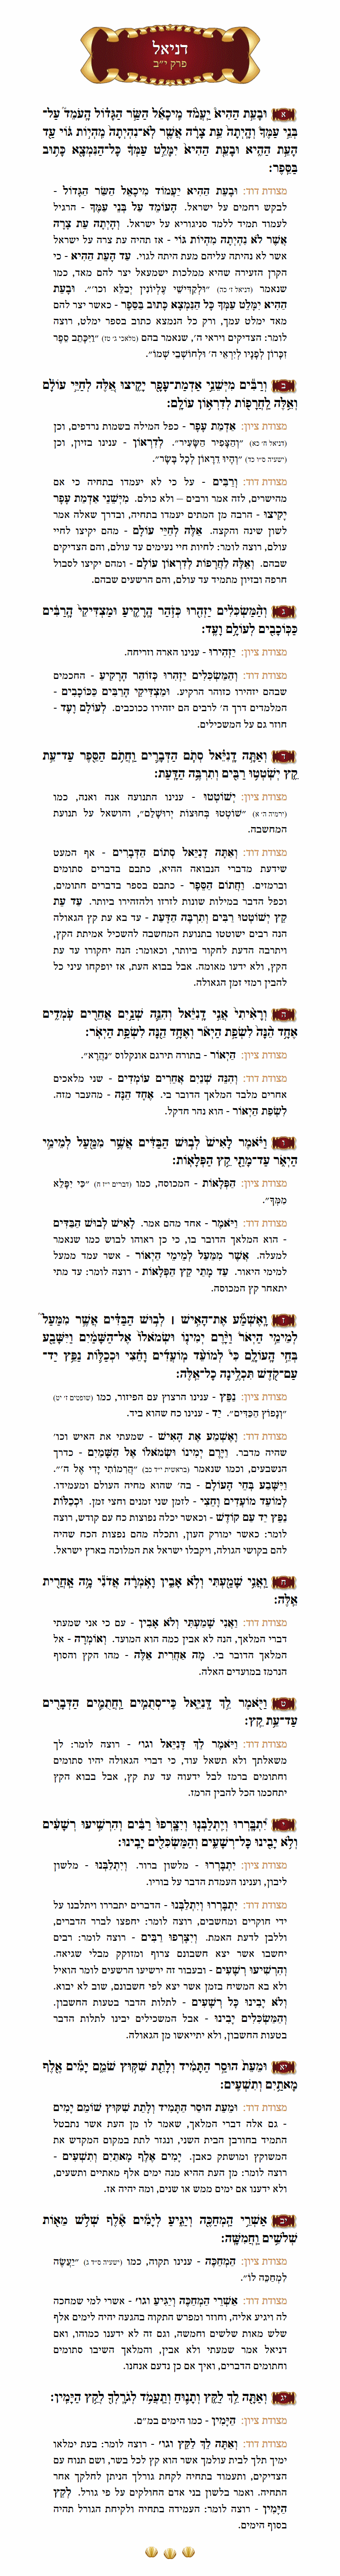 Sefer Daniel Chapter 12 with commentary